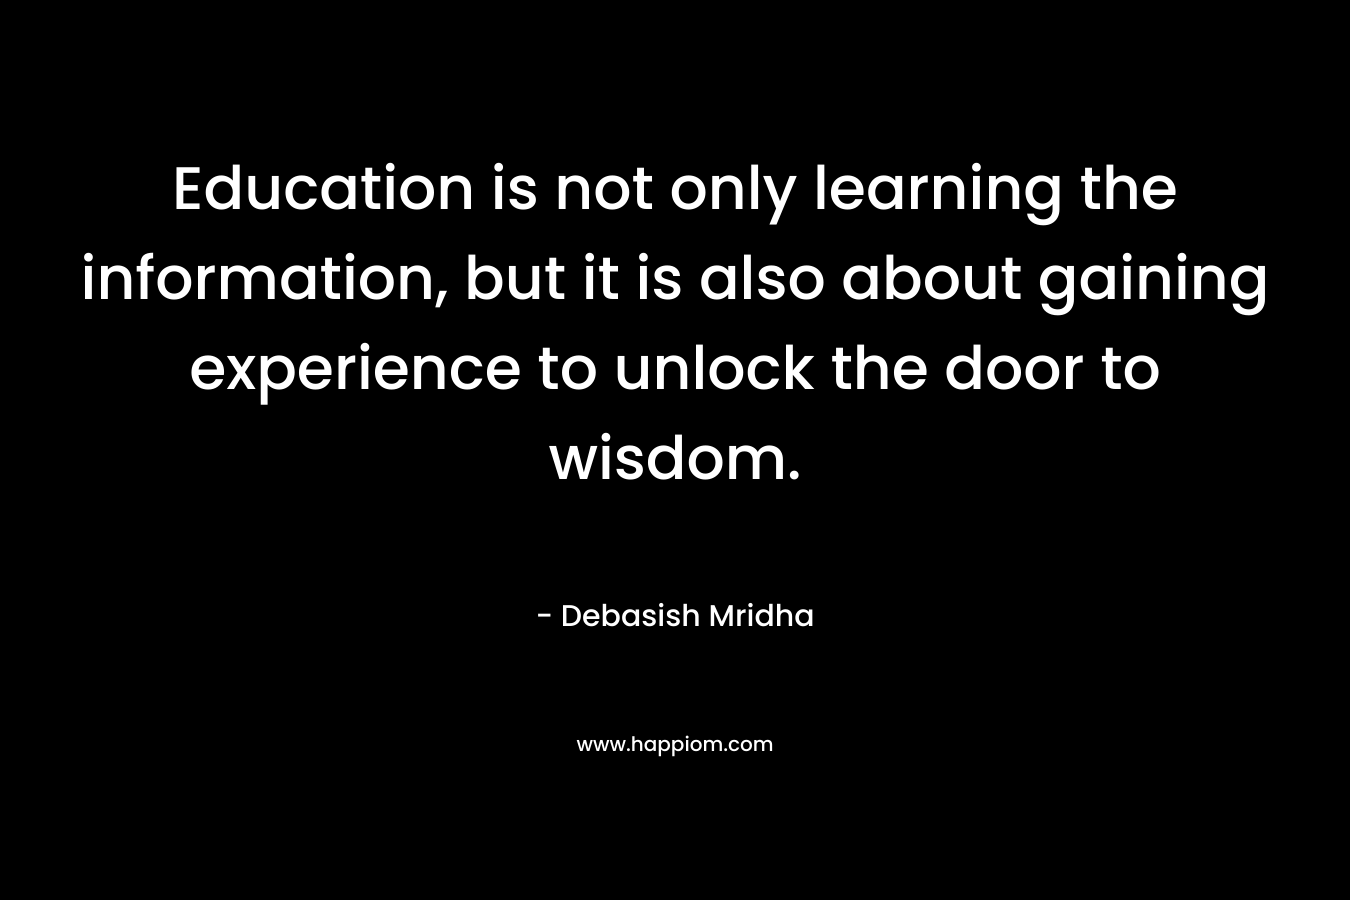 Education is not only learning the information, but it is also about gaining experience to unlock the door to wisdom. – Debasish Mridha